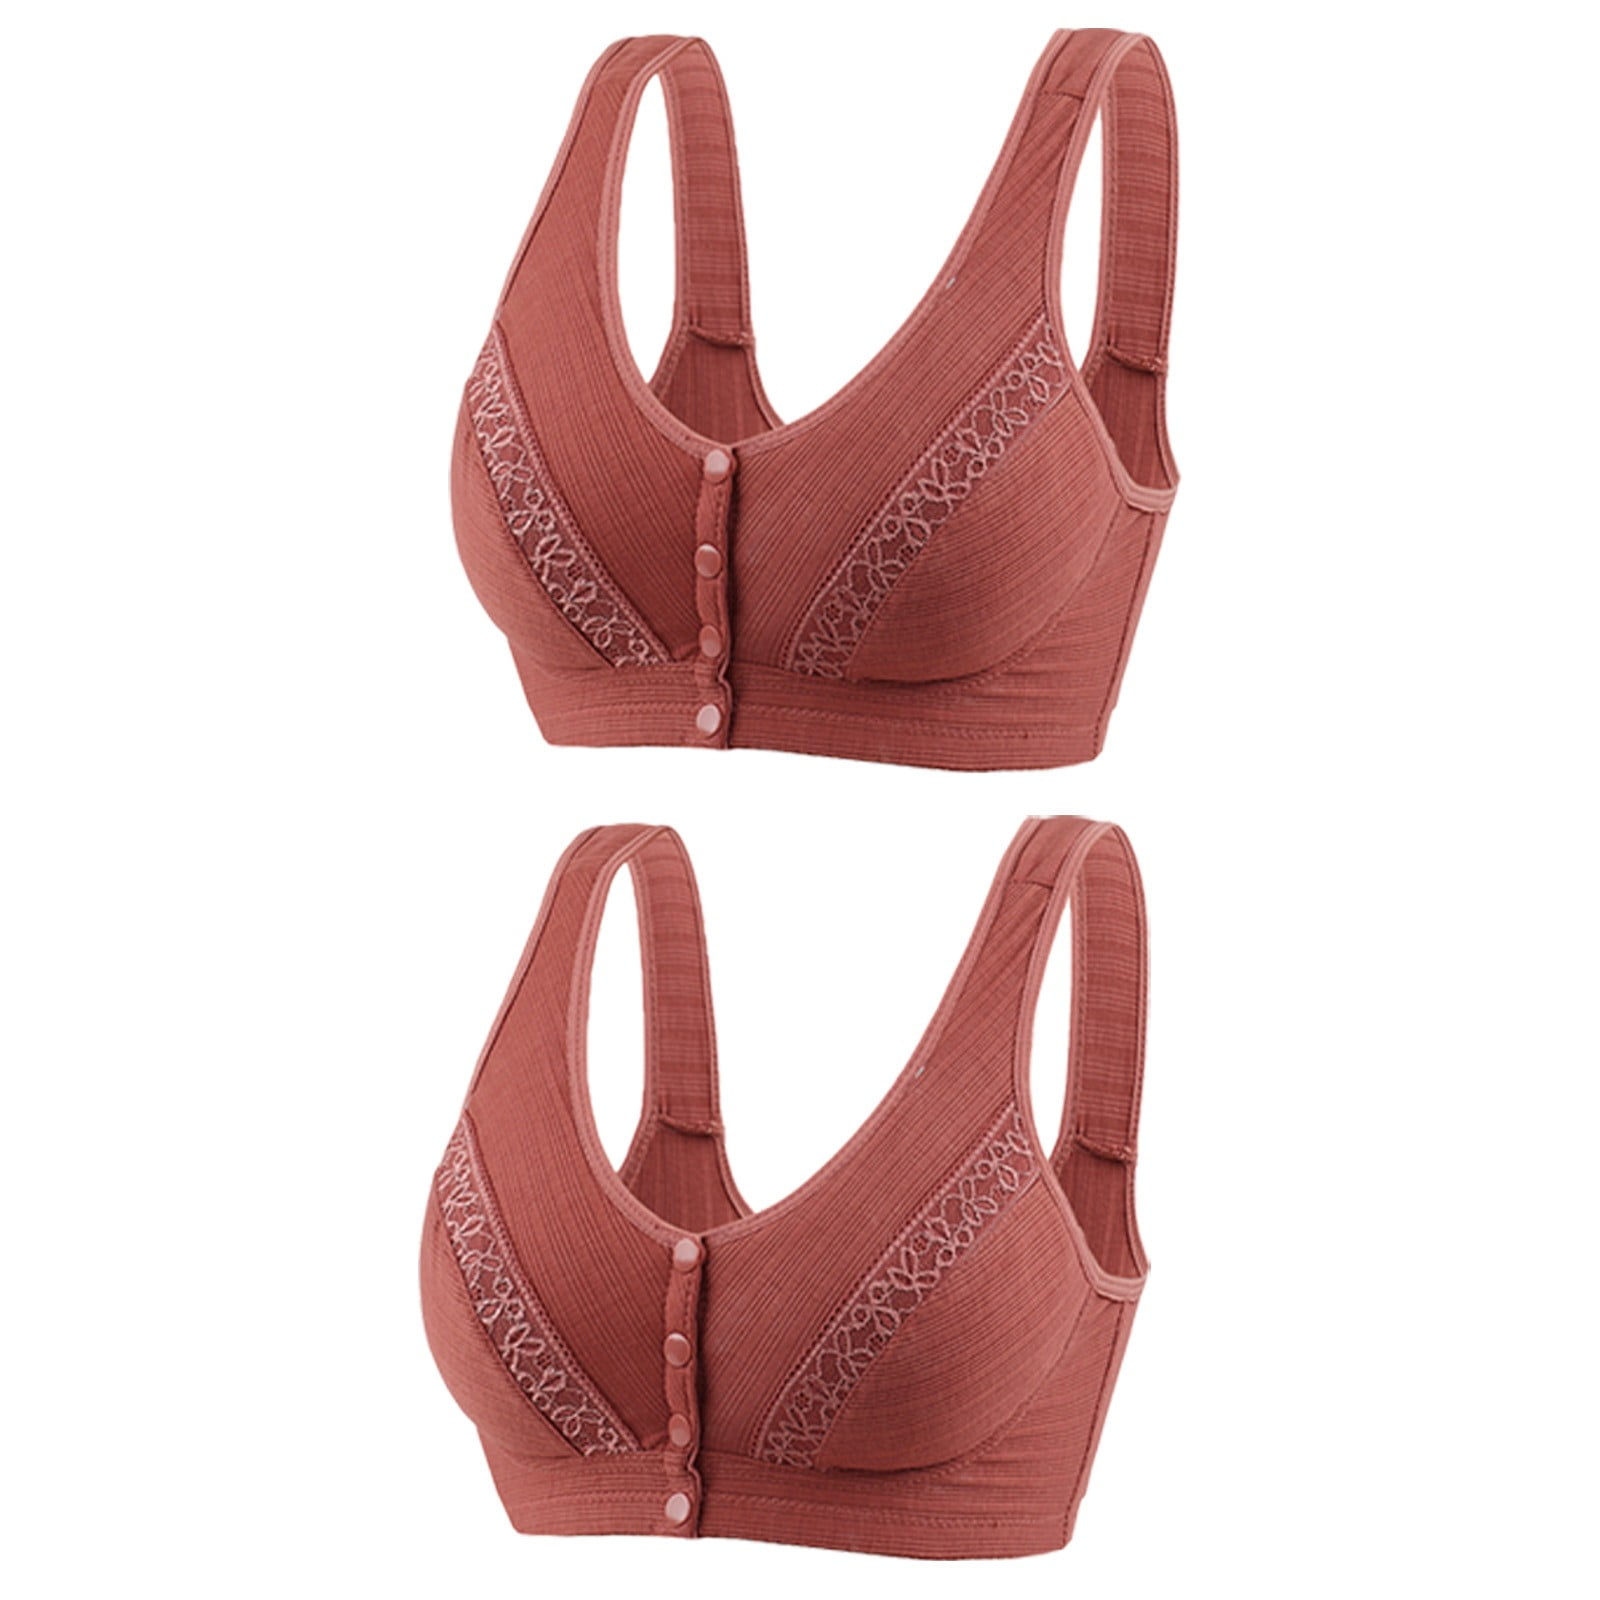 Mrat Clearance Strapless Bras for Women High Impact Sports Bralettes Front  Closure Sports Bras Lace V Neck Criss Cross Back Bralette Wireless with  Support and Lift Push up Bras Breathable Bra Brown